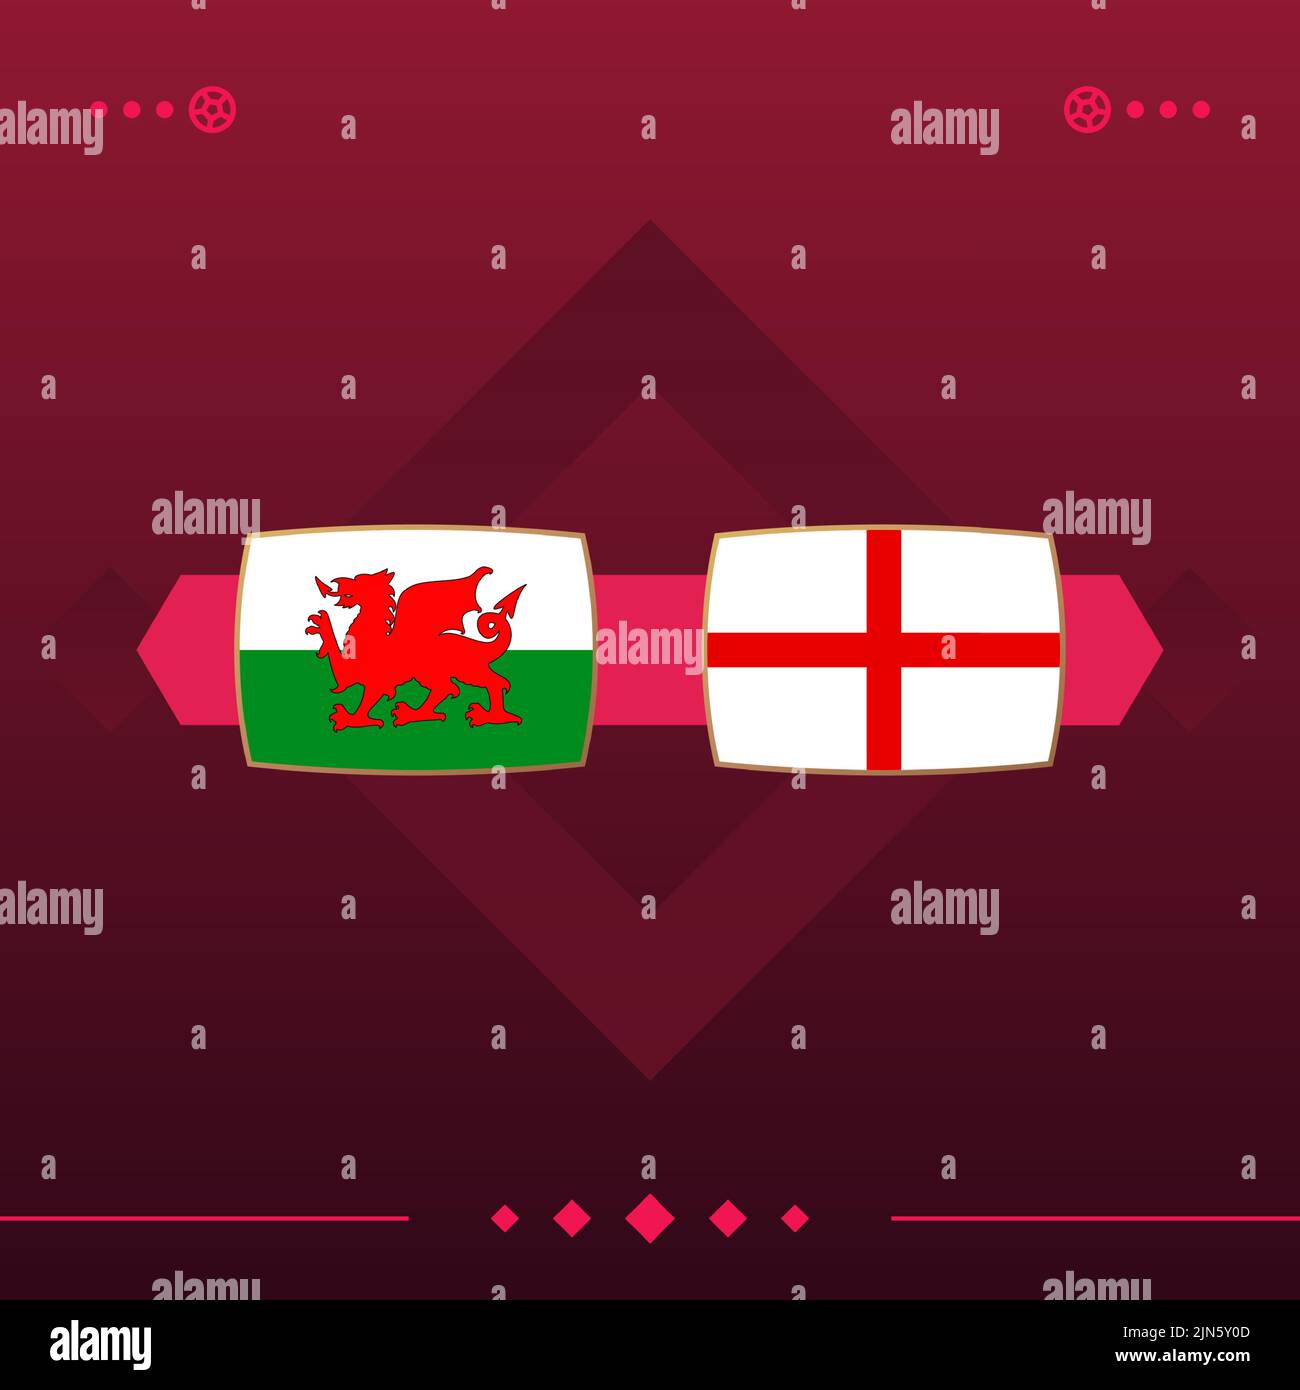 wales, england world football 2022 match versus on red background. vector illustration. Stock Vector